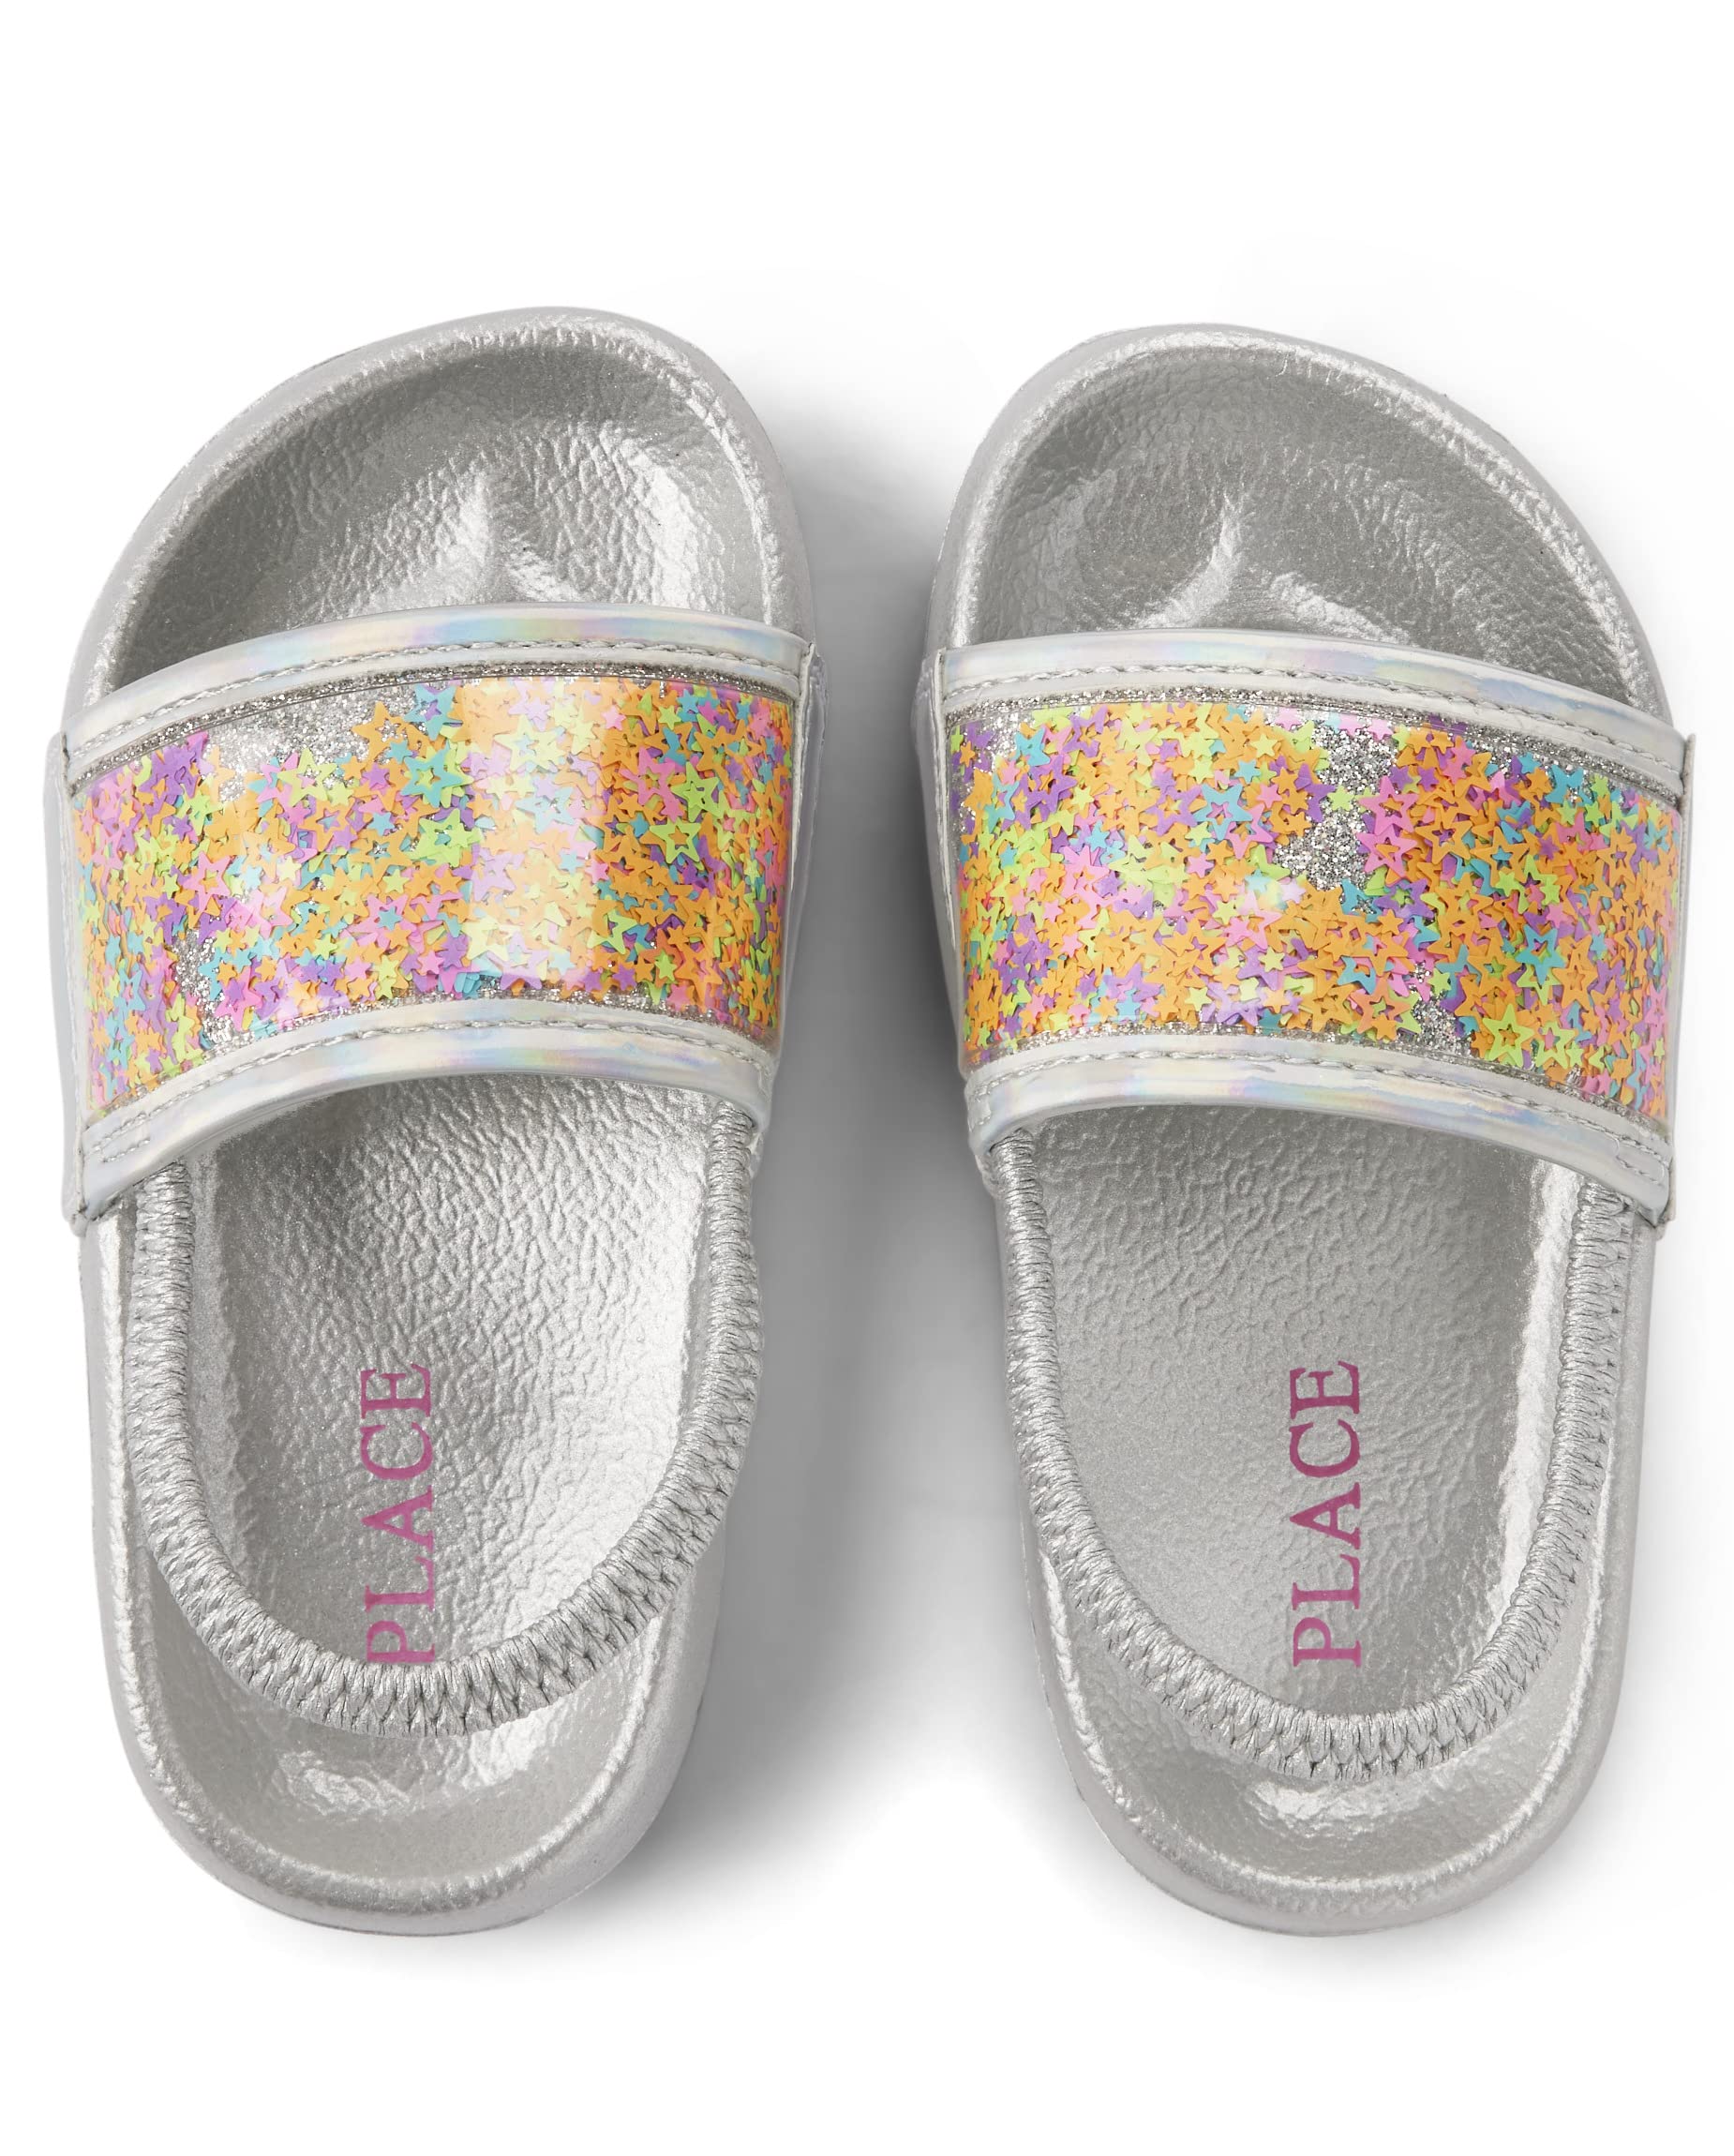 The Children's Place girls And Toddler Girls Slides